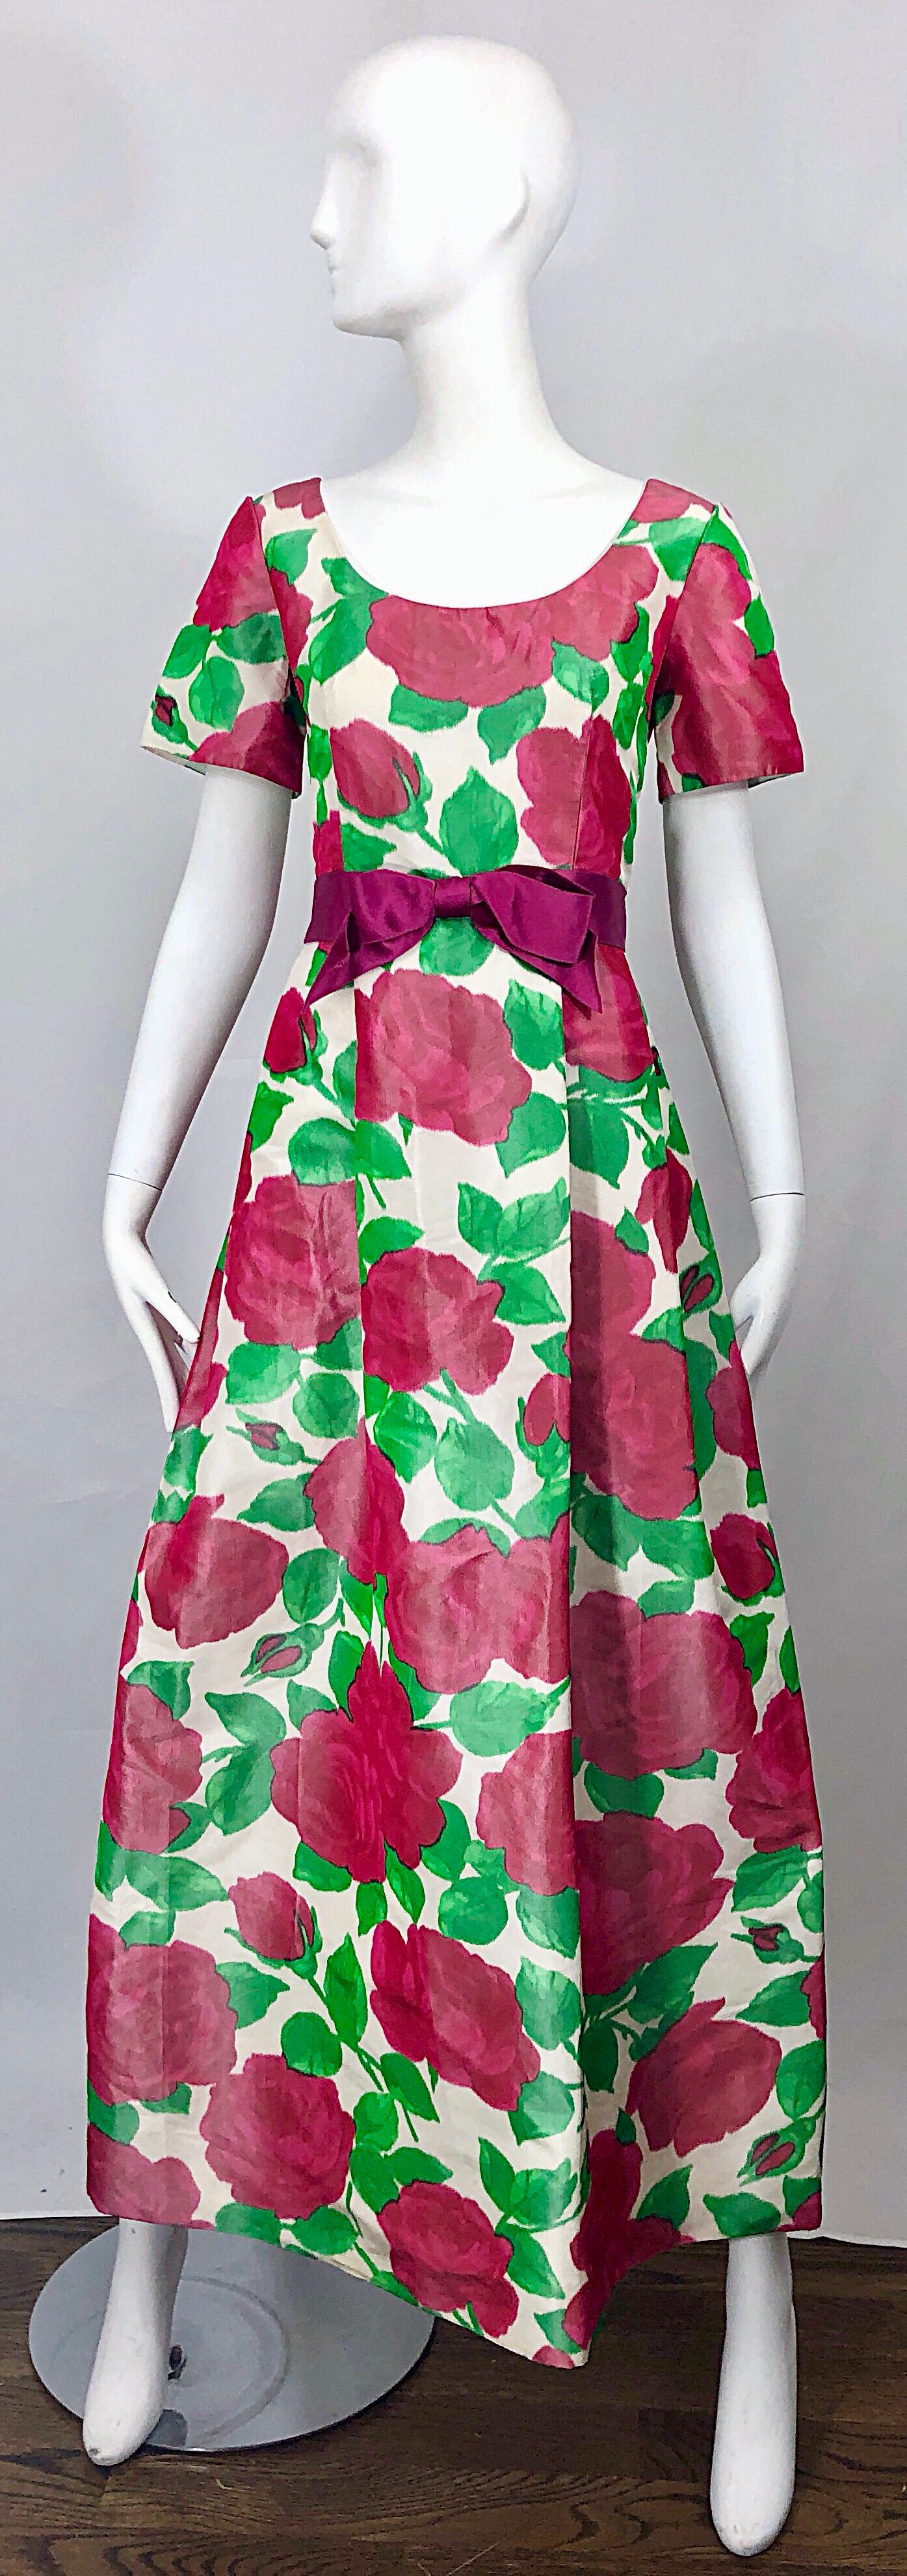 Beautiful vintage 1970s RICHILENE for ELIZABETH ARDEN silk taffeta 3-D rose print short sleeve couture gown! Features bold rose prints in vibrant hot pink and green. Tailored bodice with a forgiving full bell skirt. Fuchsia silk velvet attached bow